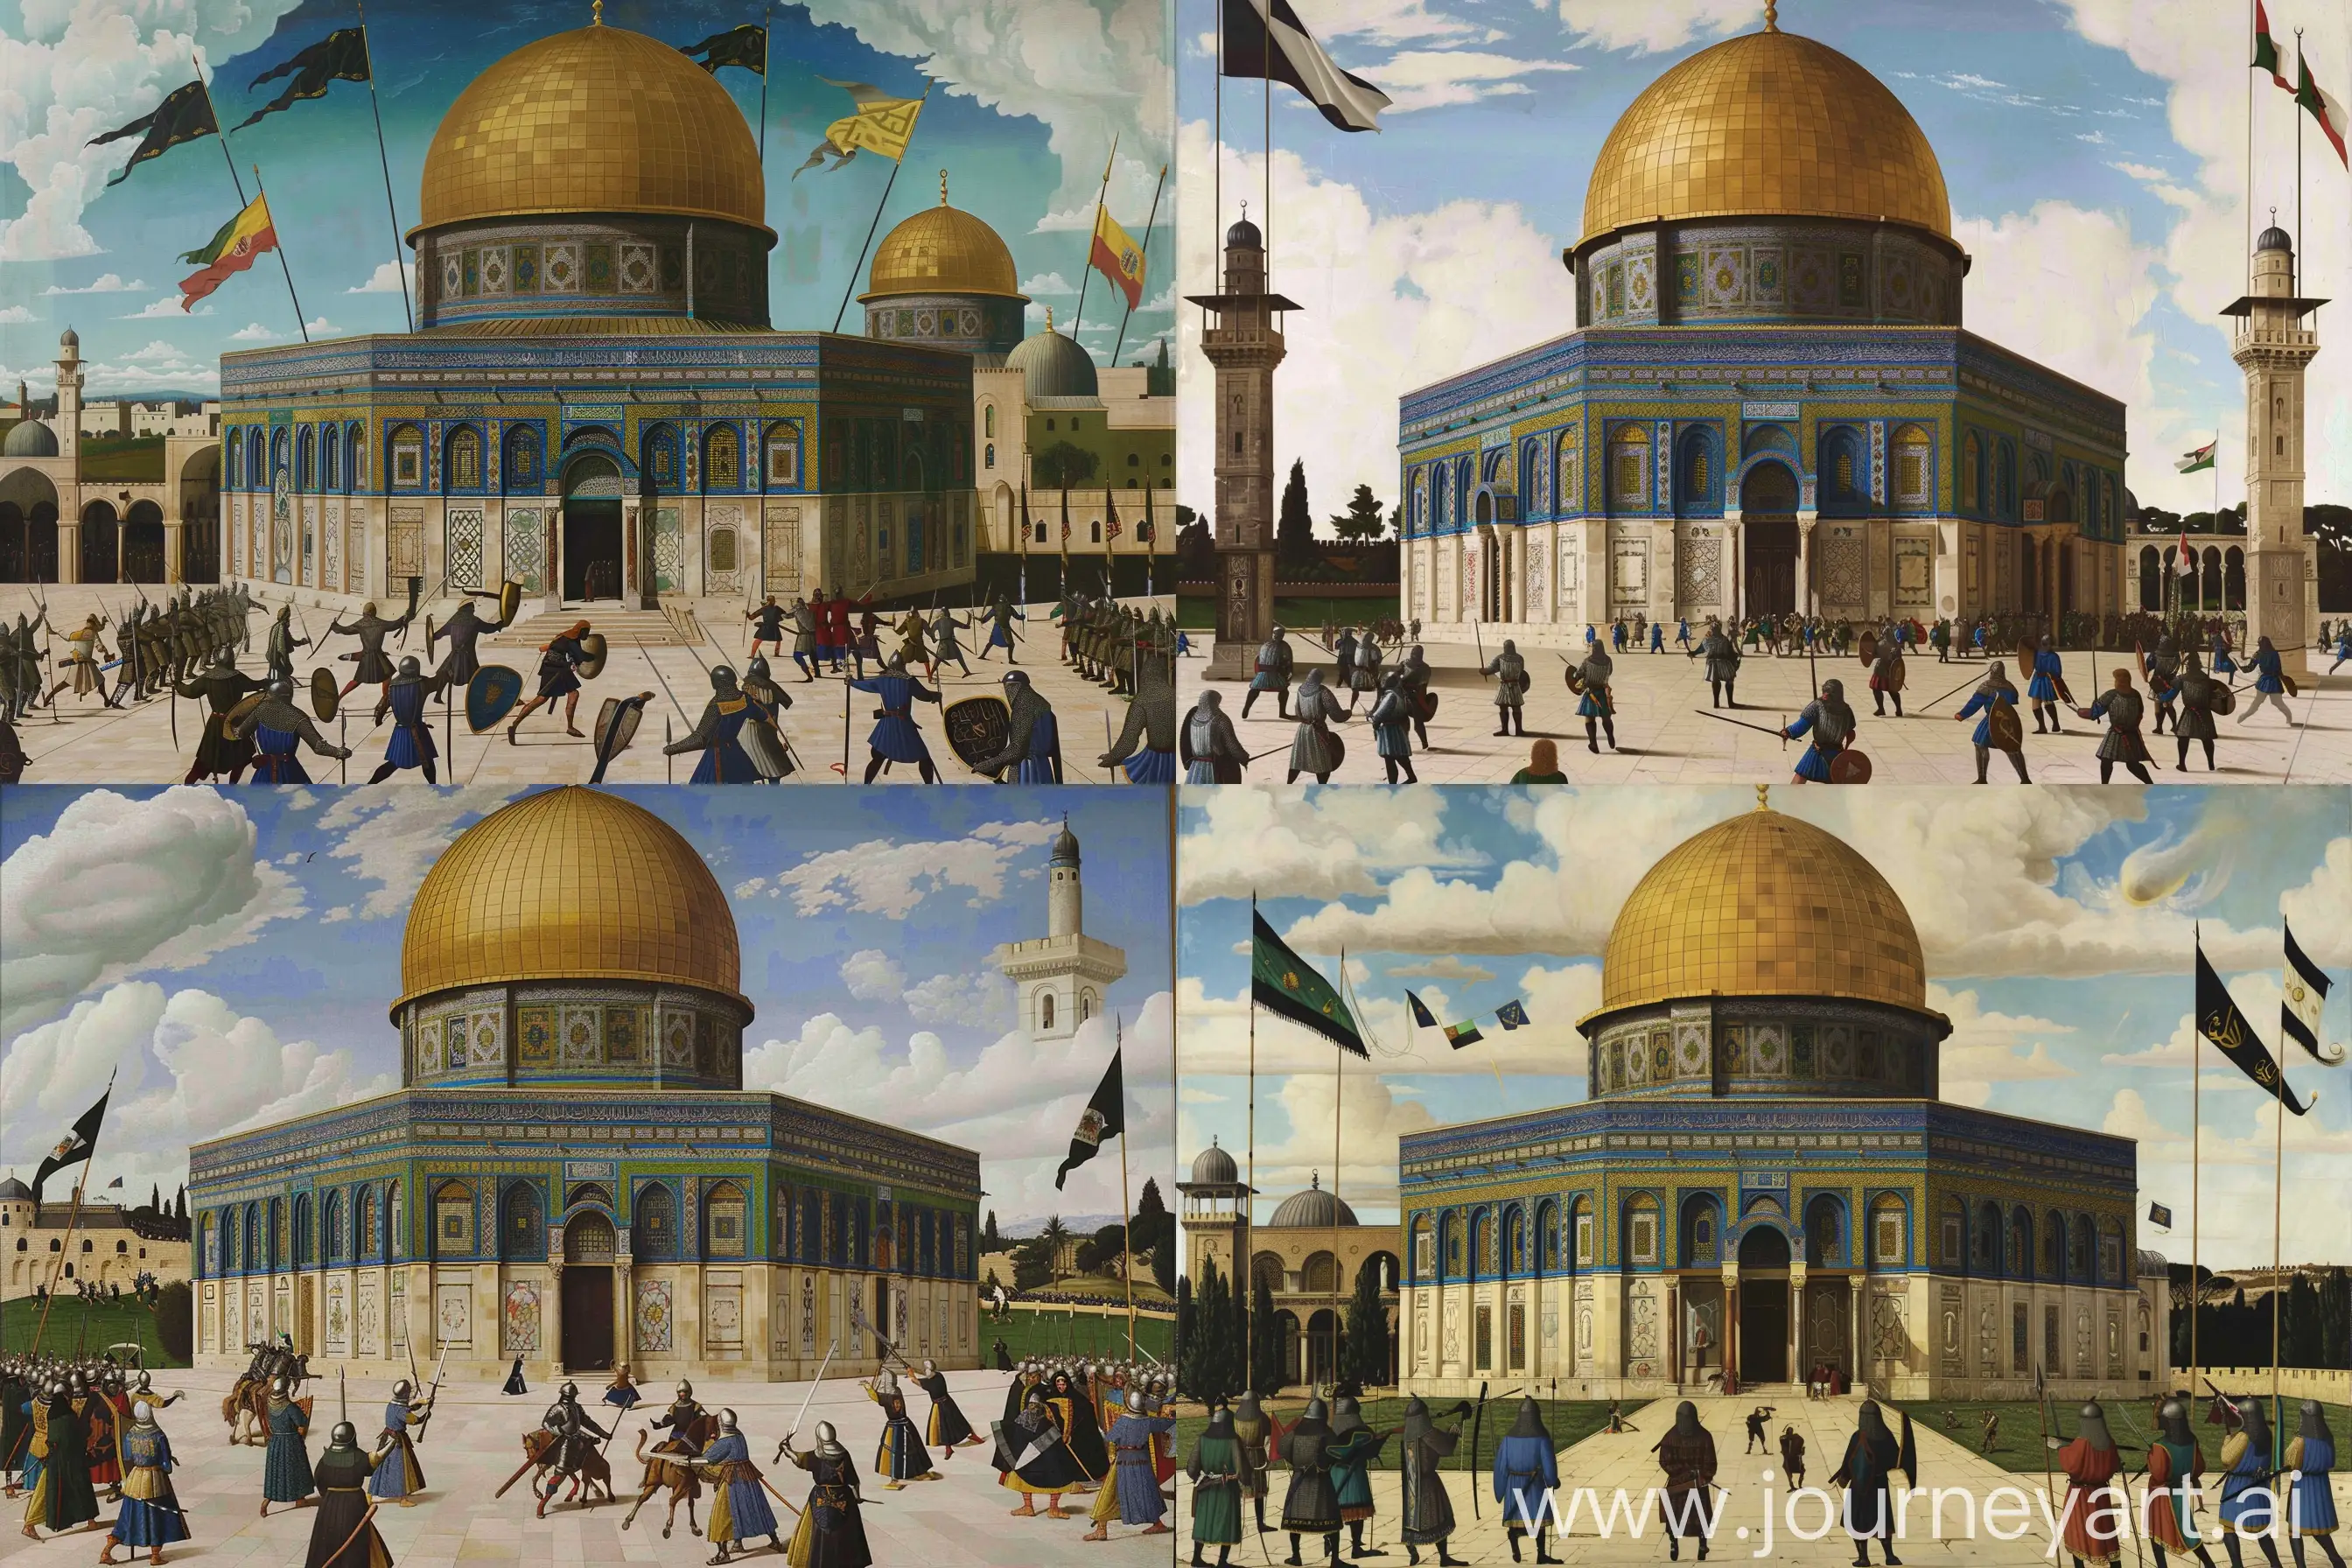 medieval Renaissance painting depicting a medieval battle scene between saracen knights and crusaders, in a lush green field, Al-aqsa mosque of Jerusalem at the center, masjid al-aqsa, cloudy sky, flags and knight banners, heraldic aesthetic --ar 3:2 --v 6 --sref https://cdn.discordapp.com/attachments/1209182749441654865/1247644078070566992/Raffaello_-_Spozalizio_-_Web_Gallery_of_Art.jpg?ex=66616f58&is=66601dd8&hm=476953bed1d1d14ea4d4401426997a6b5832802a906a7439c121236ef68b581e& --cref <https://cdn.discordapp.com/attachments/1213041174428782623/1247881003733614628/images_-_2024-06-05T172308.069.jpg?ex=6661a33f&is=666051bf&hm=d620e36438856c91679b0027c2b15792aacc0cf617e8f43acfe529758e6c60f4&> --cw 99 --sw 999 --q 1